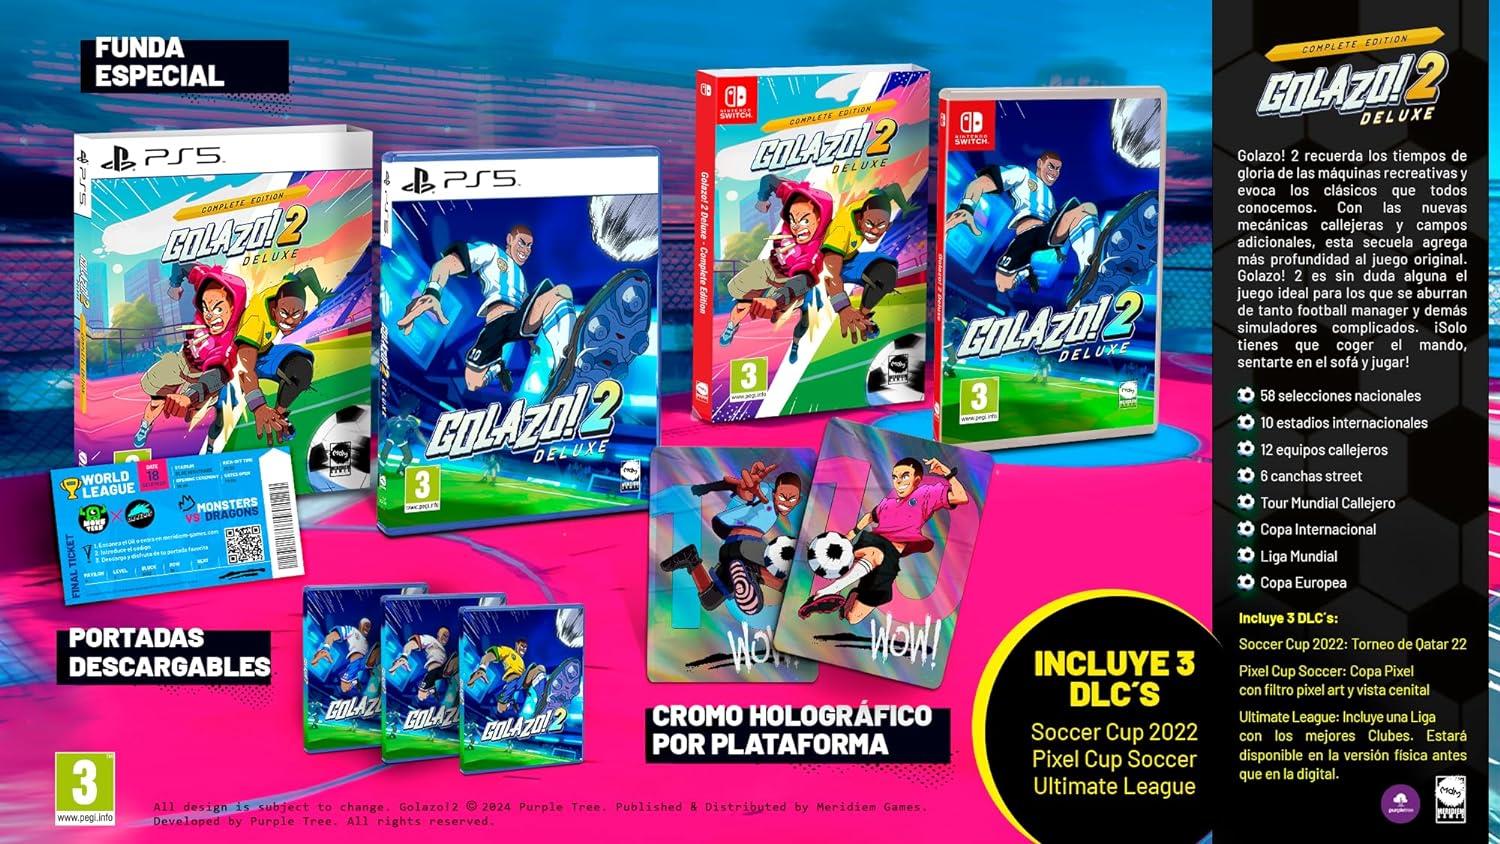 Golazo! 2 Deluxe Complete Edition Nintendo Switch Game